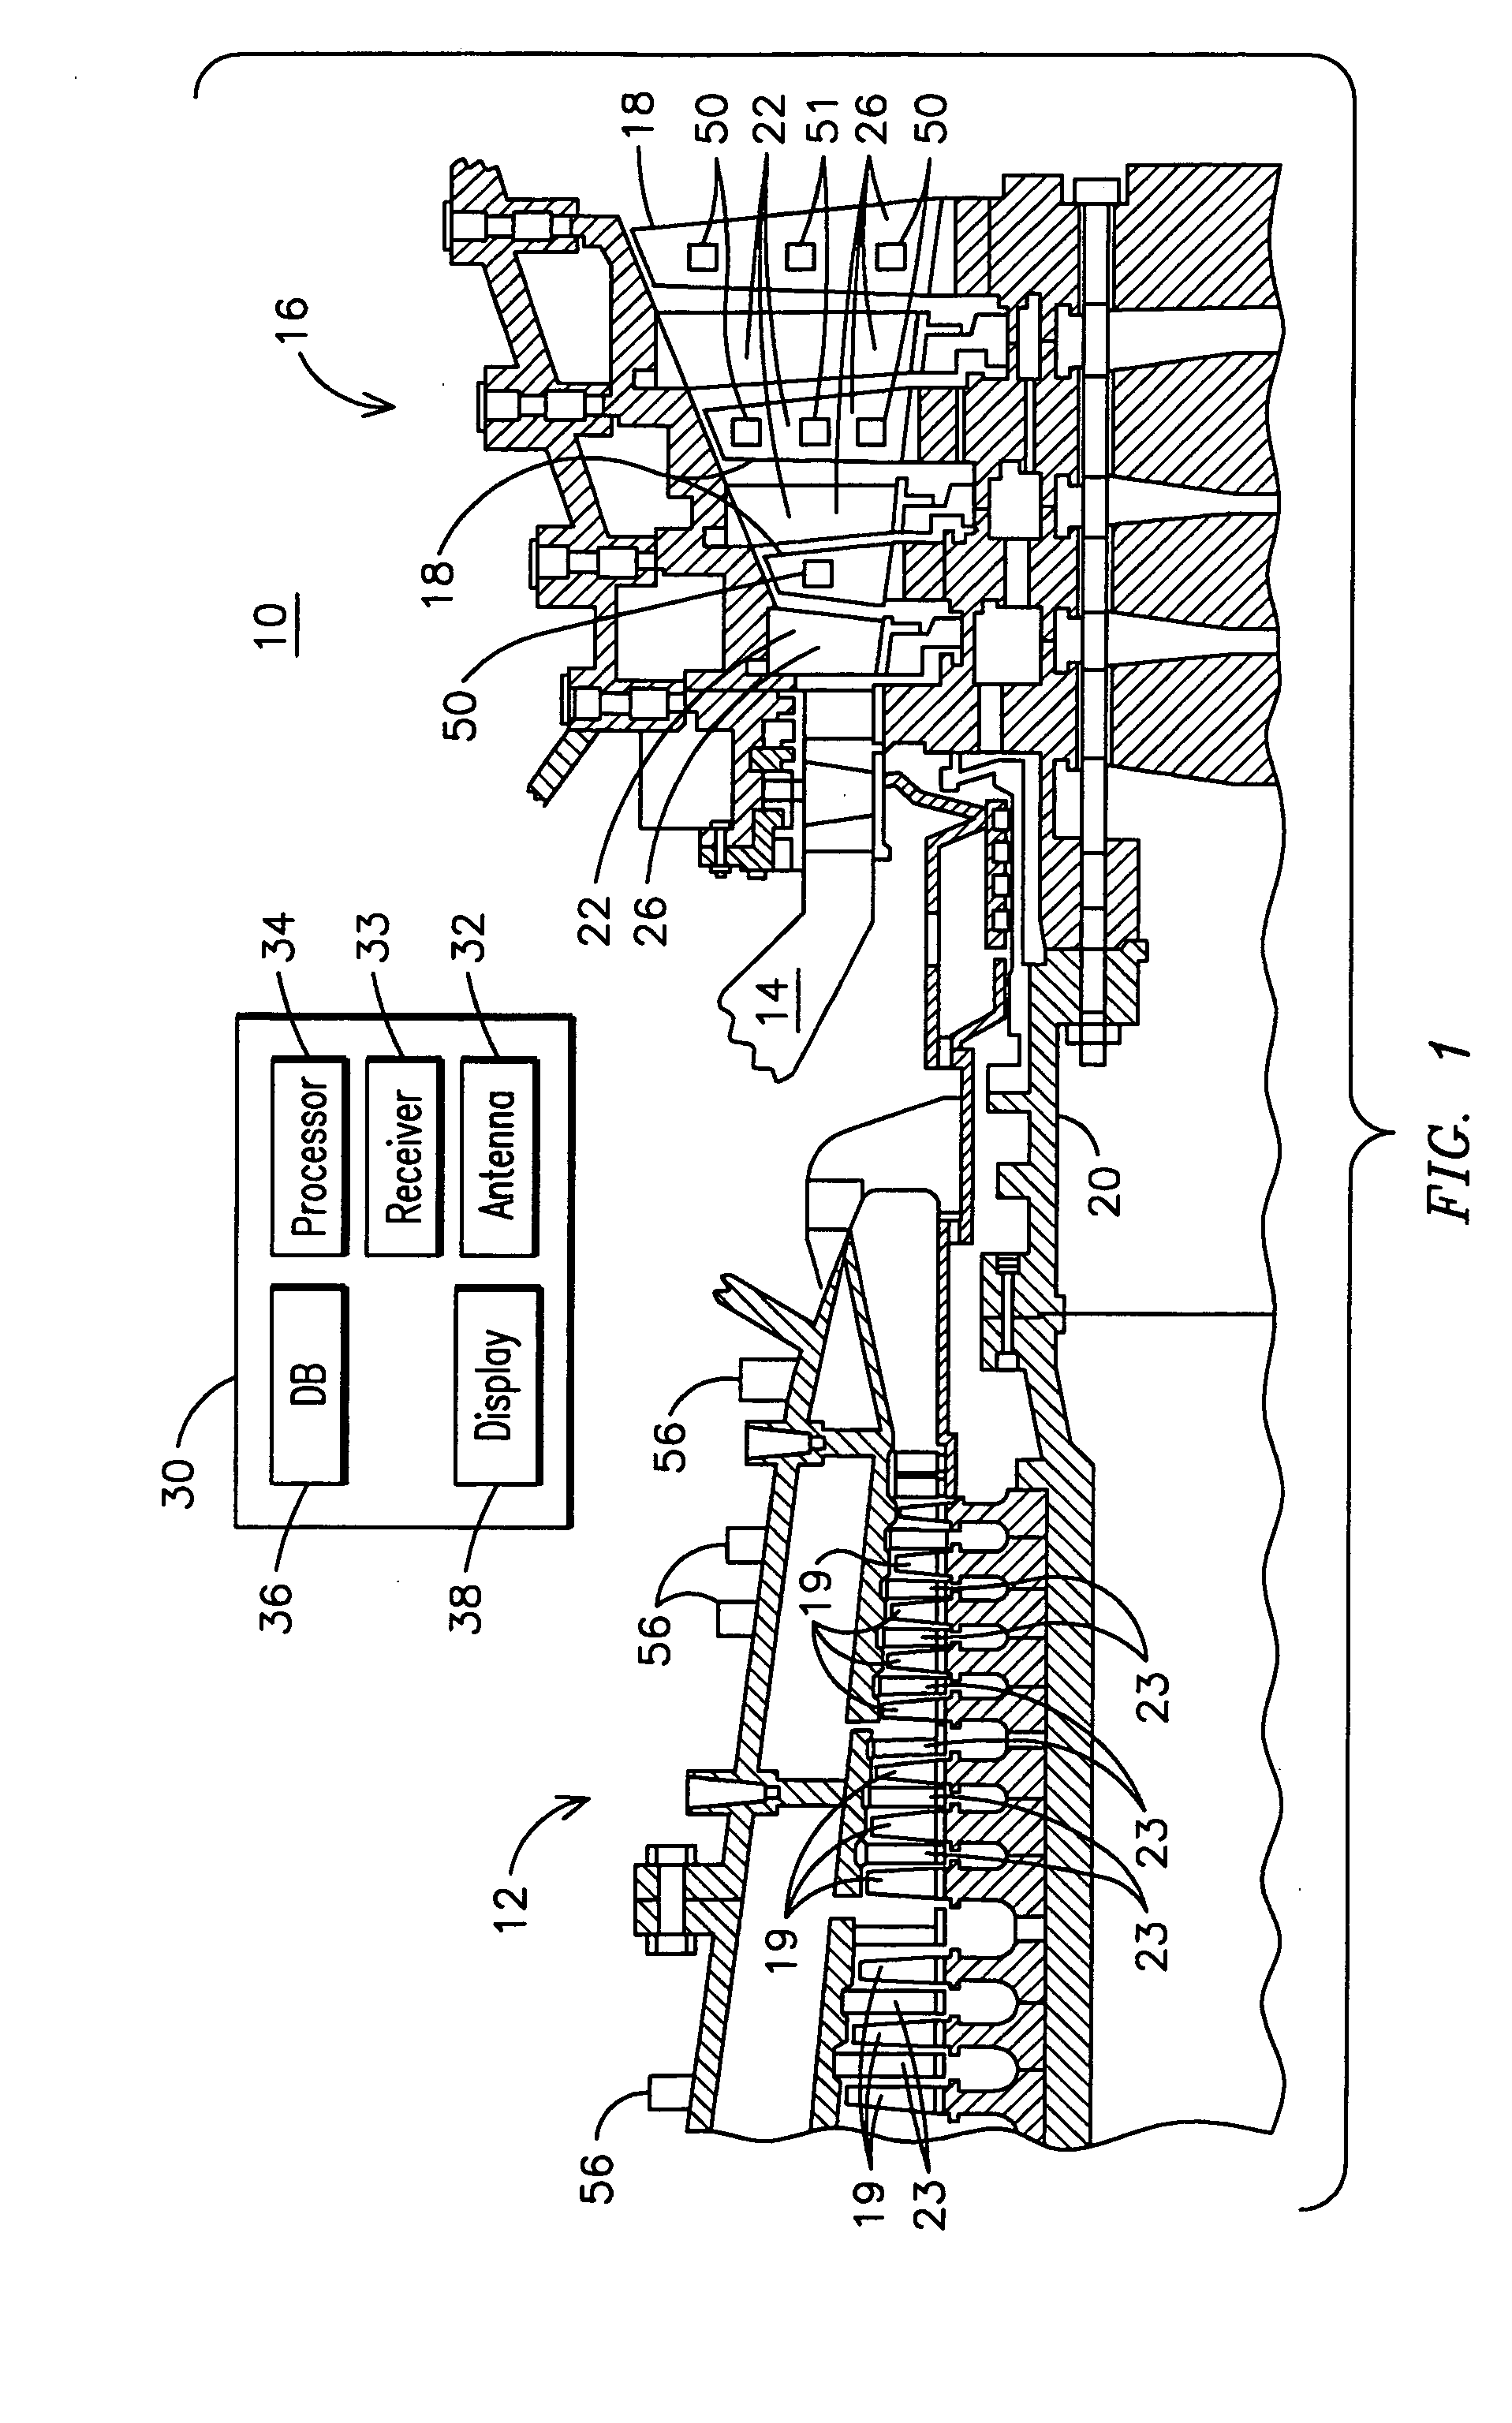 Electrical assembly for monitoring conditions in a combustion turbine operating environment